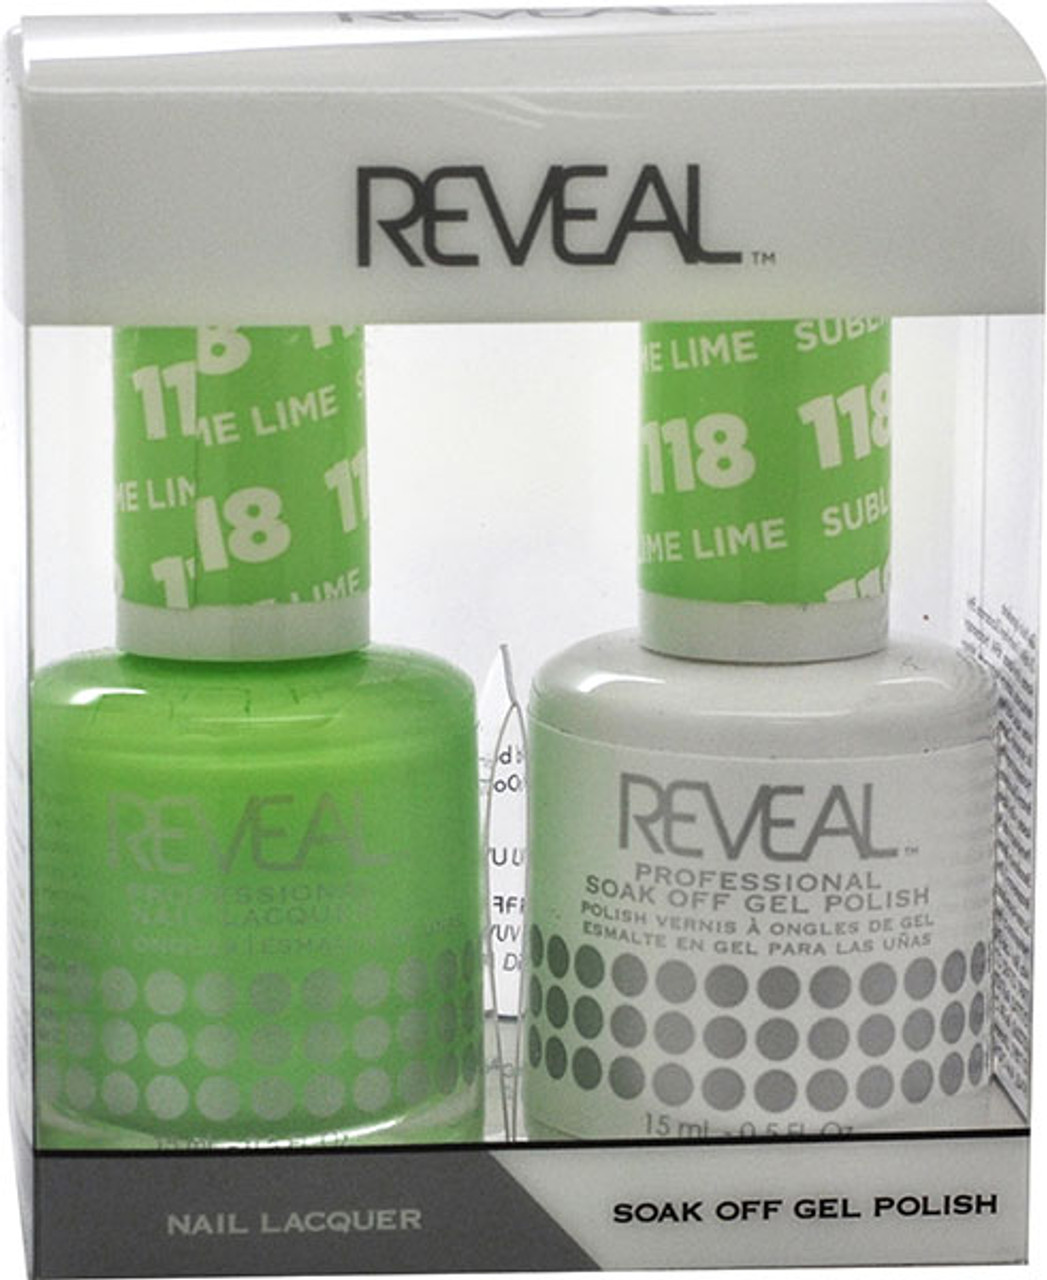 Reveal Gel Polish & Nail Lacquer Matching Duo - SUBLIME LIME - .5 oz